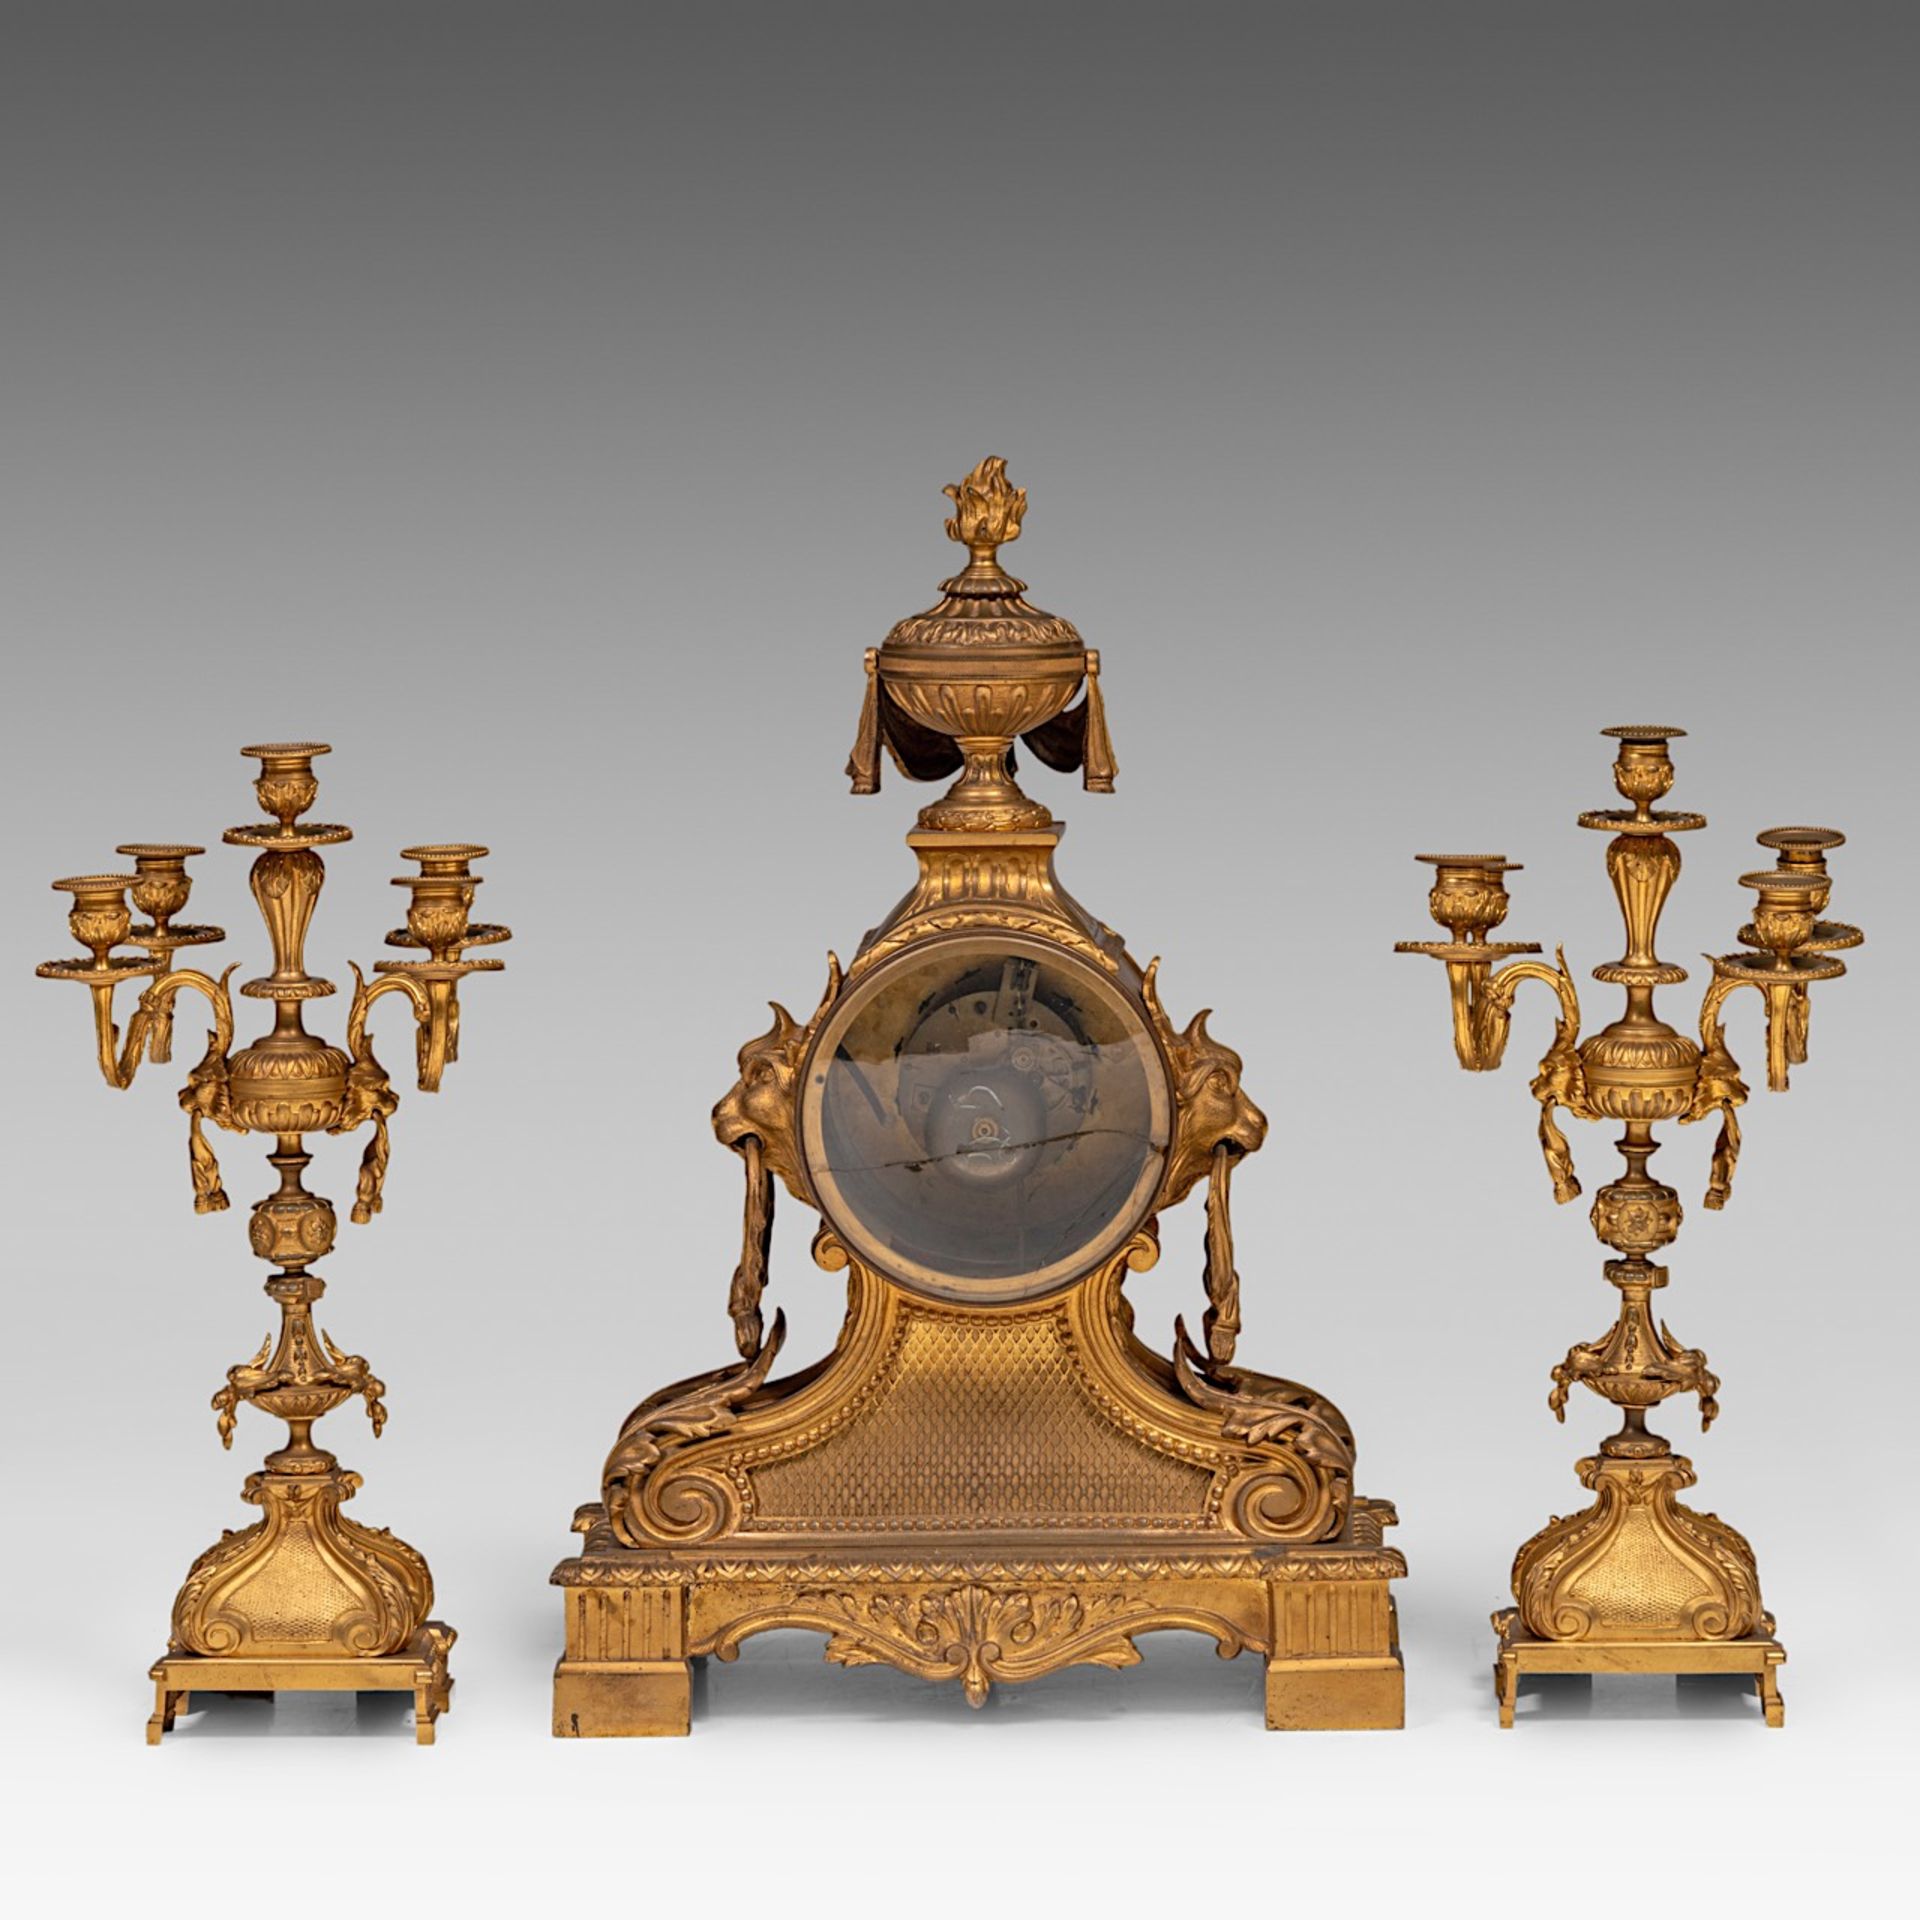 A three-piece Neoclassical gilt bronze mantle clock, H 50 - 65 cm - Image 3 of 6